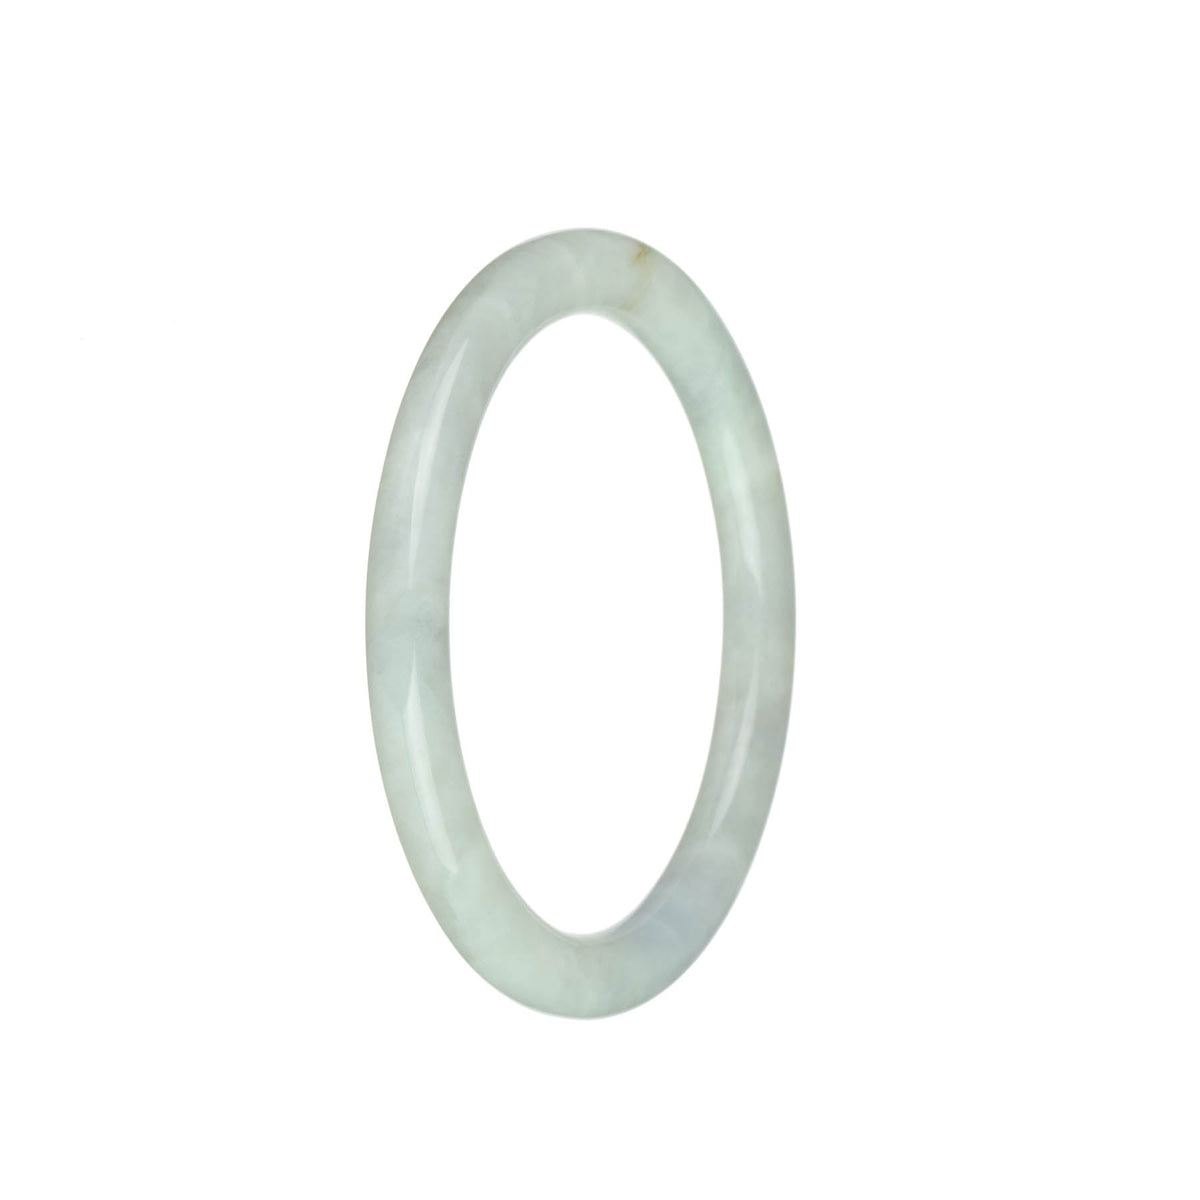 Certified Grade A White Traditional Jade Bracelet - 59mm Petite Round